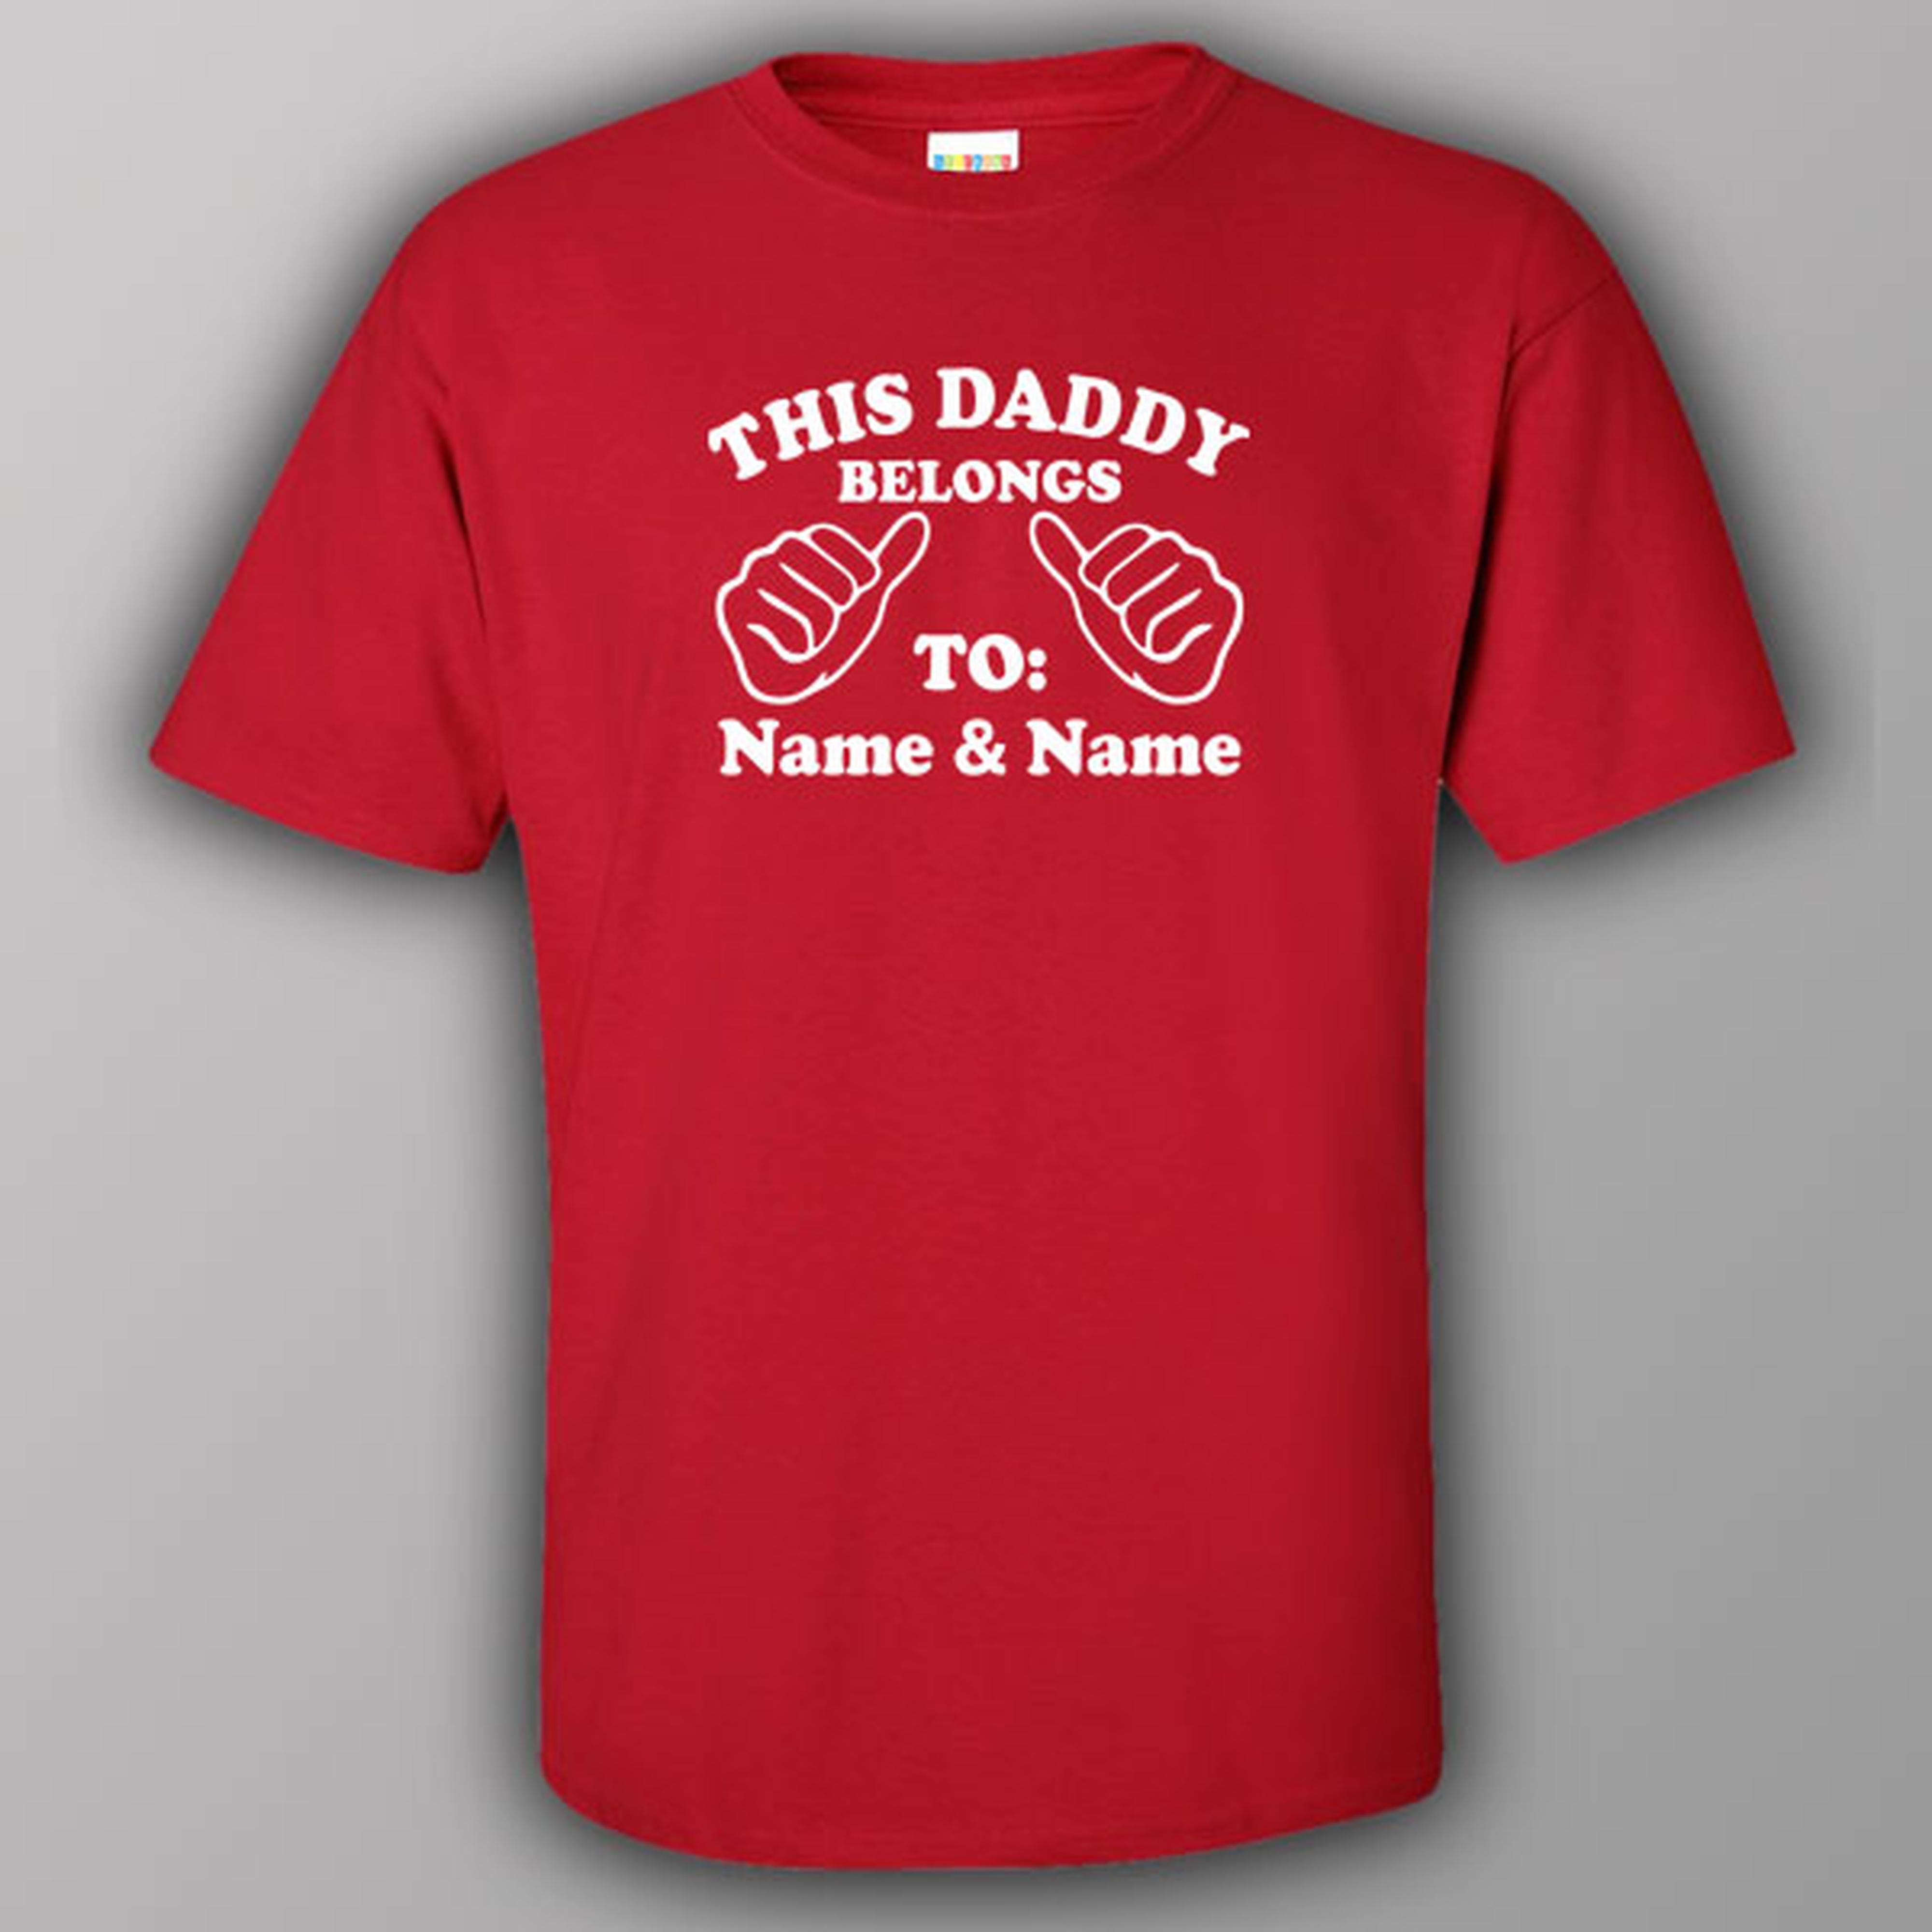 this-daddy-belongs-to-personalised-t-shirt